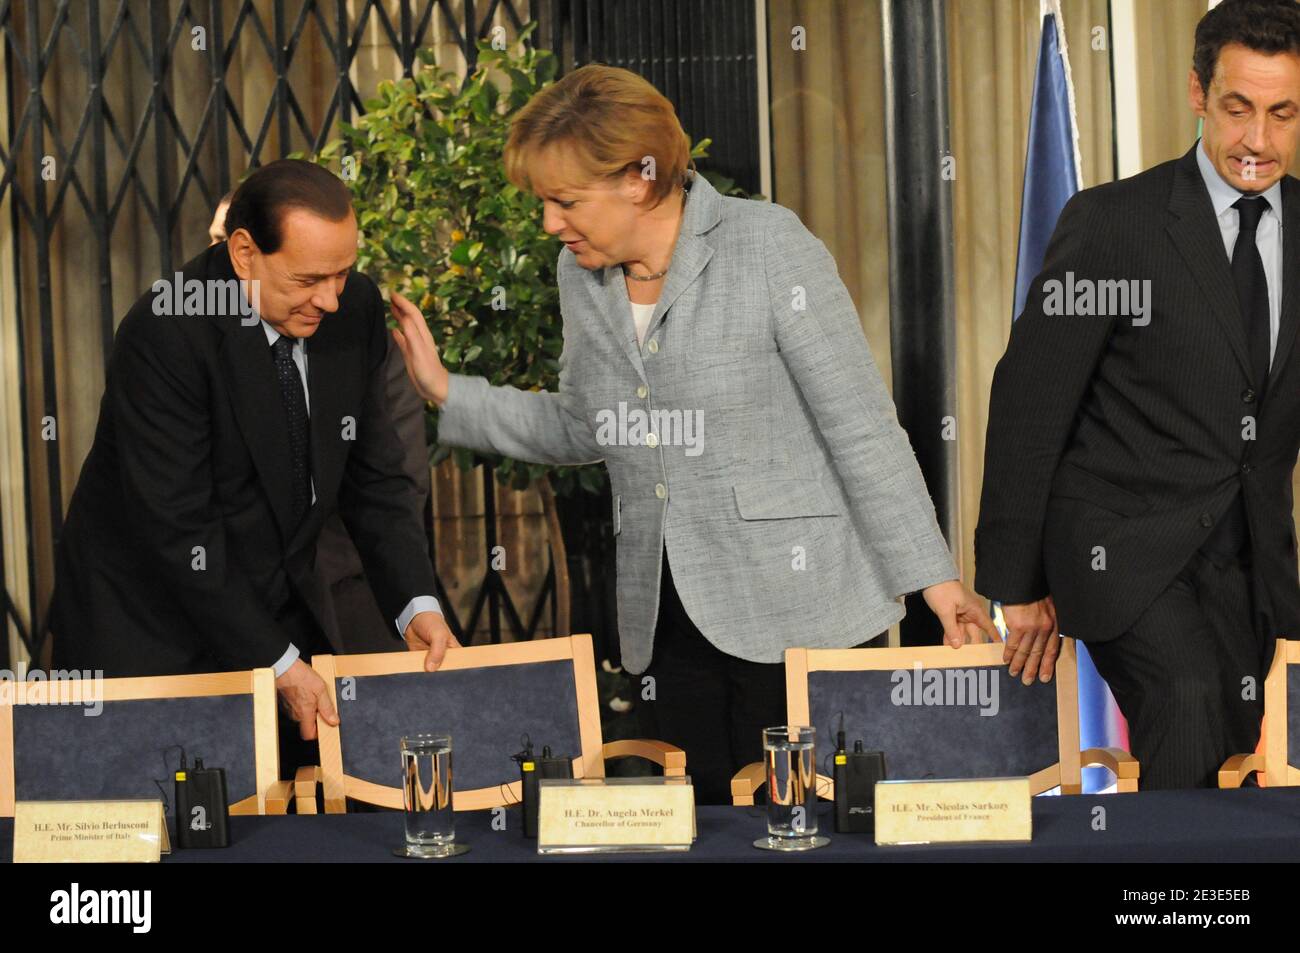 (R-L) French President Nicolas Sarkozy, German Chancellor Angela Merkel and Italian Prime Minister Silvio Berlusconi seen during a joint press conference at the residence of Israeli Prime Minister Ehud Olmert in Jerusalem, Israel on January 18, 2009. Photo by Ammar Abd Rabbo/ABACAPRESS.COM Stock Photo